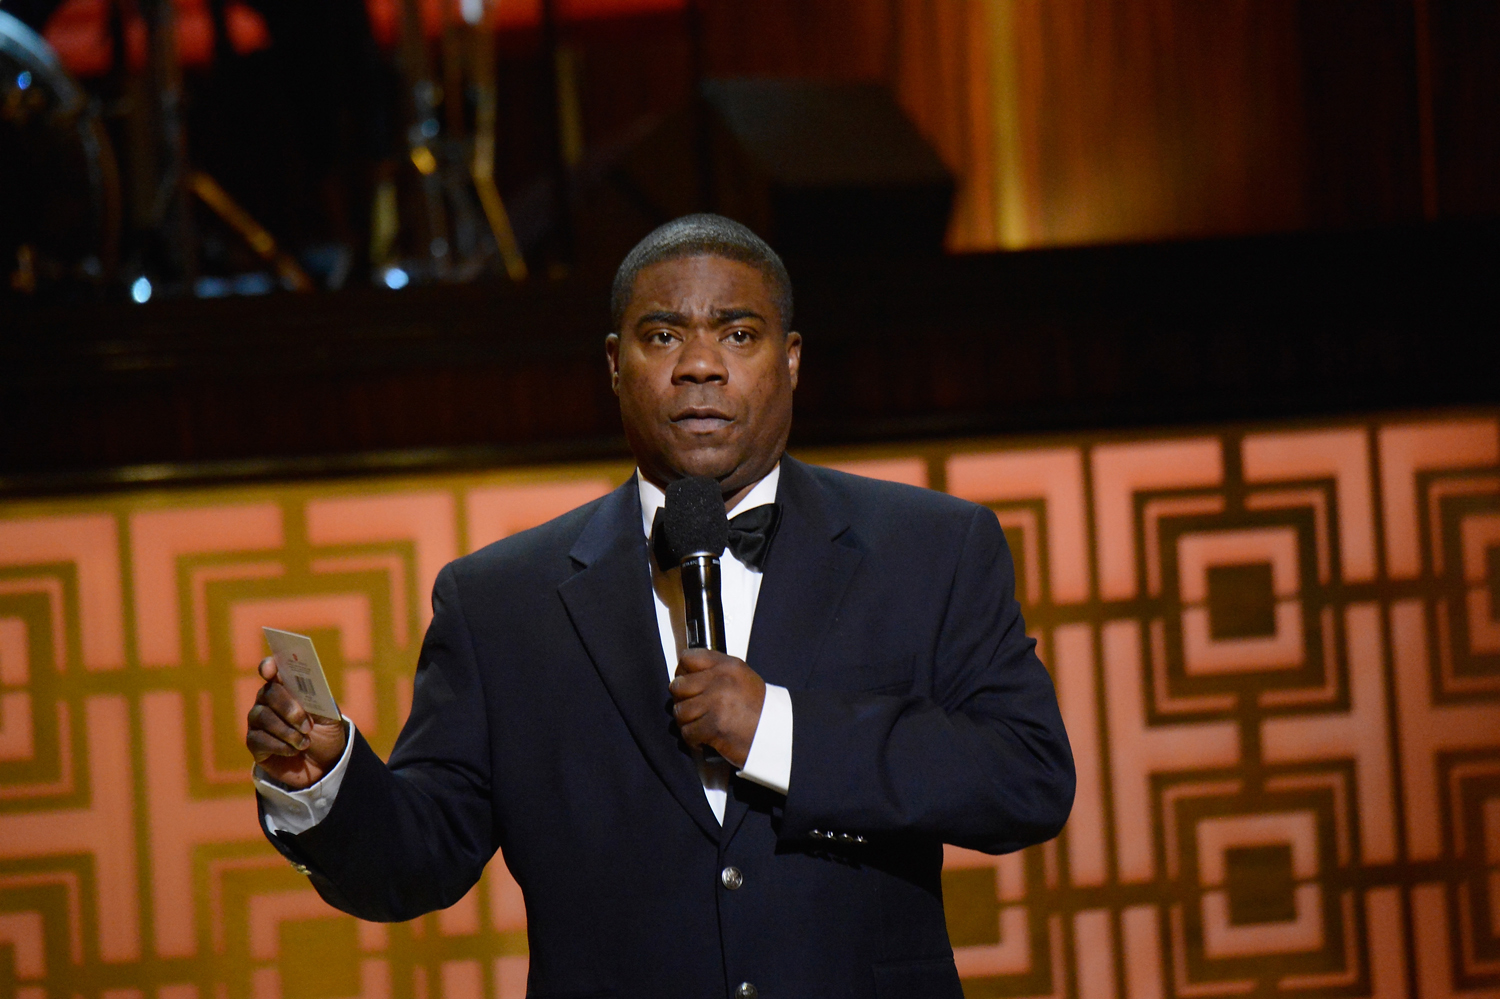 Tracy Morgan speaks onstage at Spike TV's 